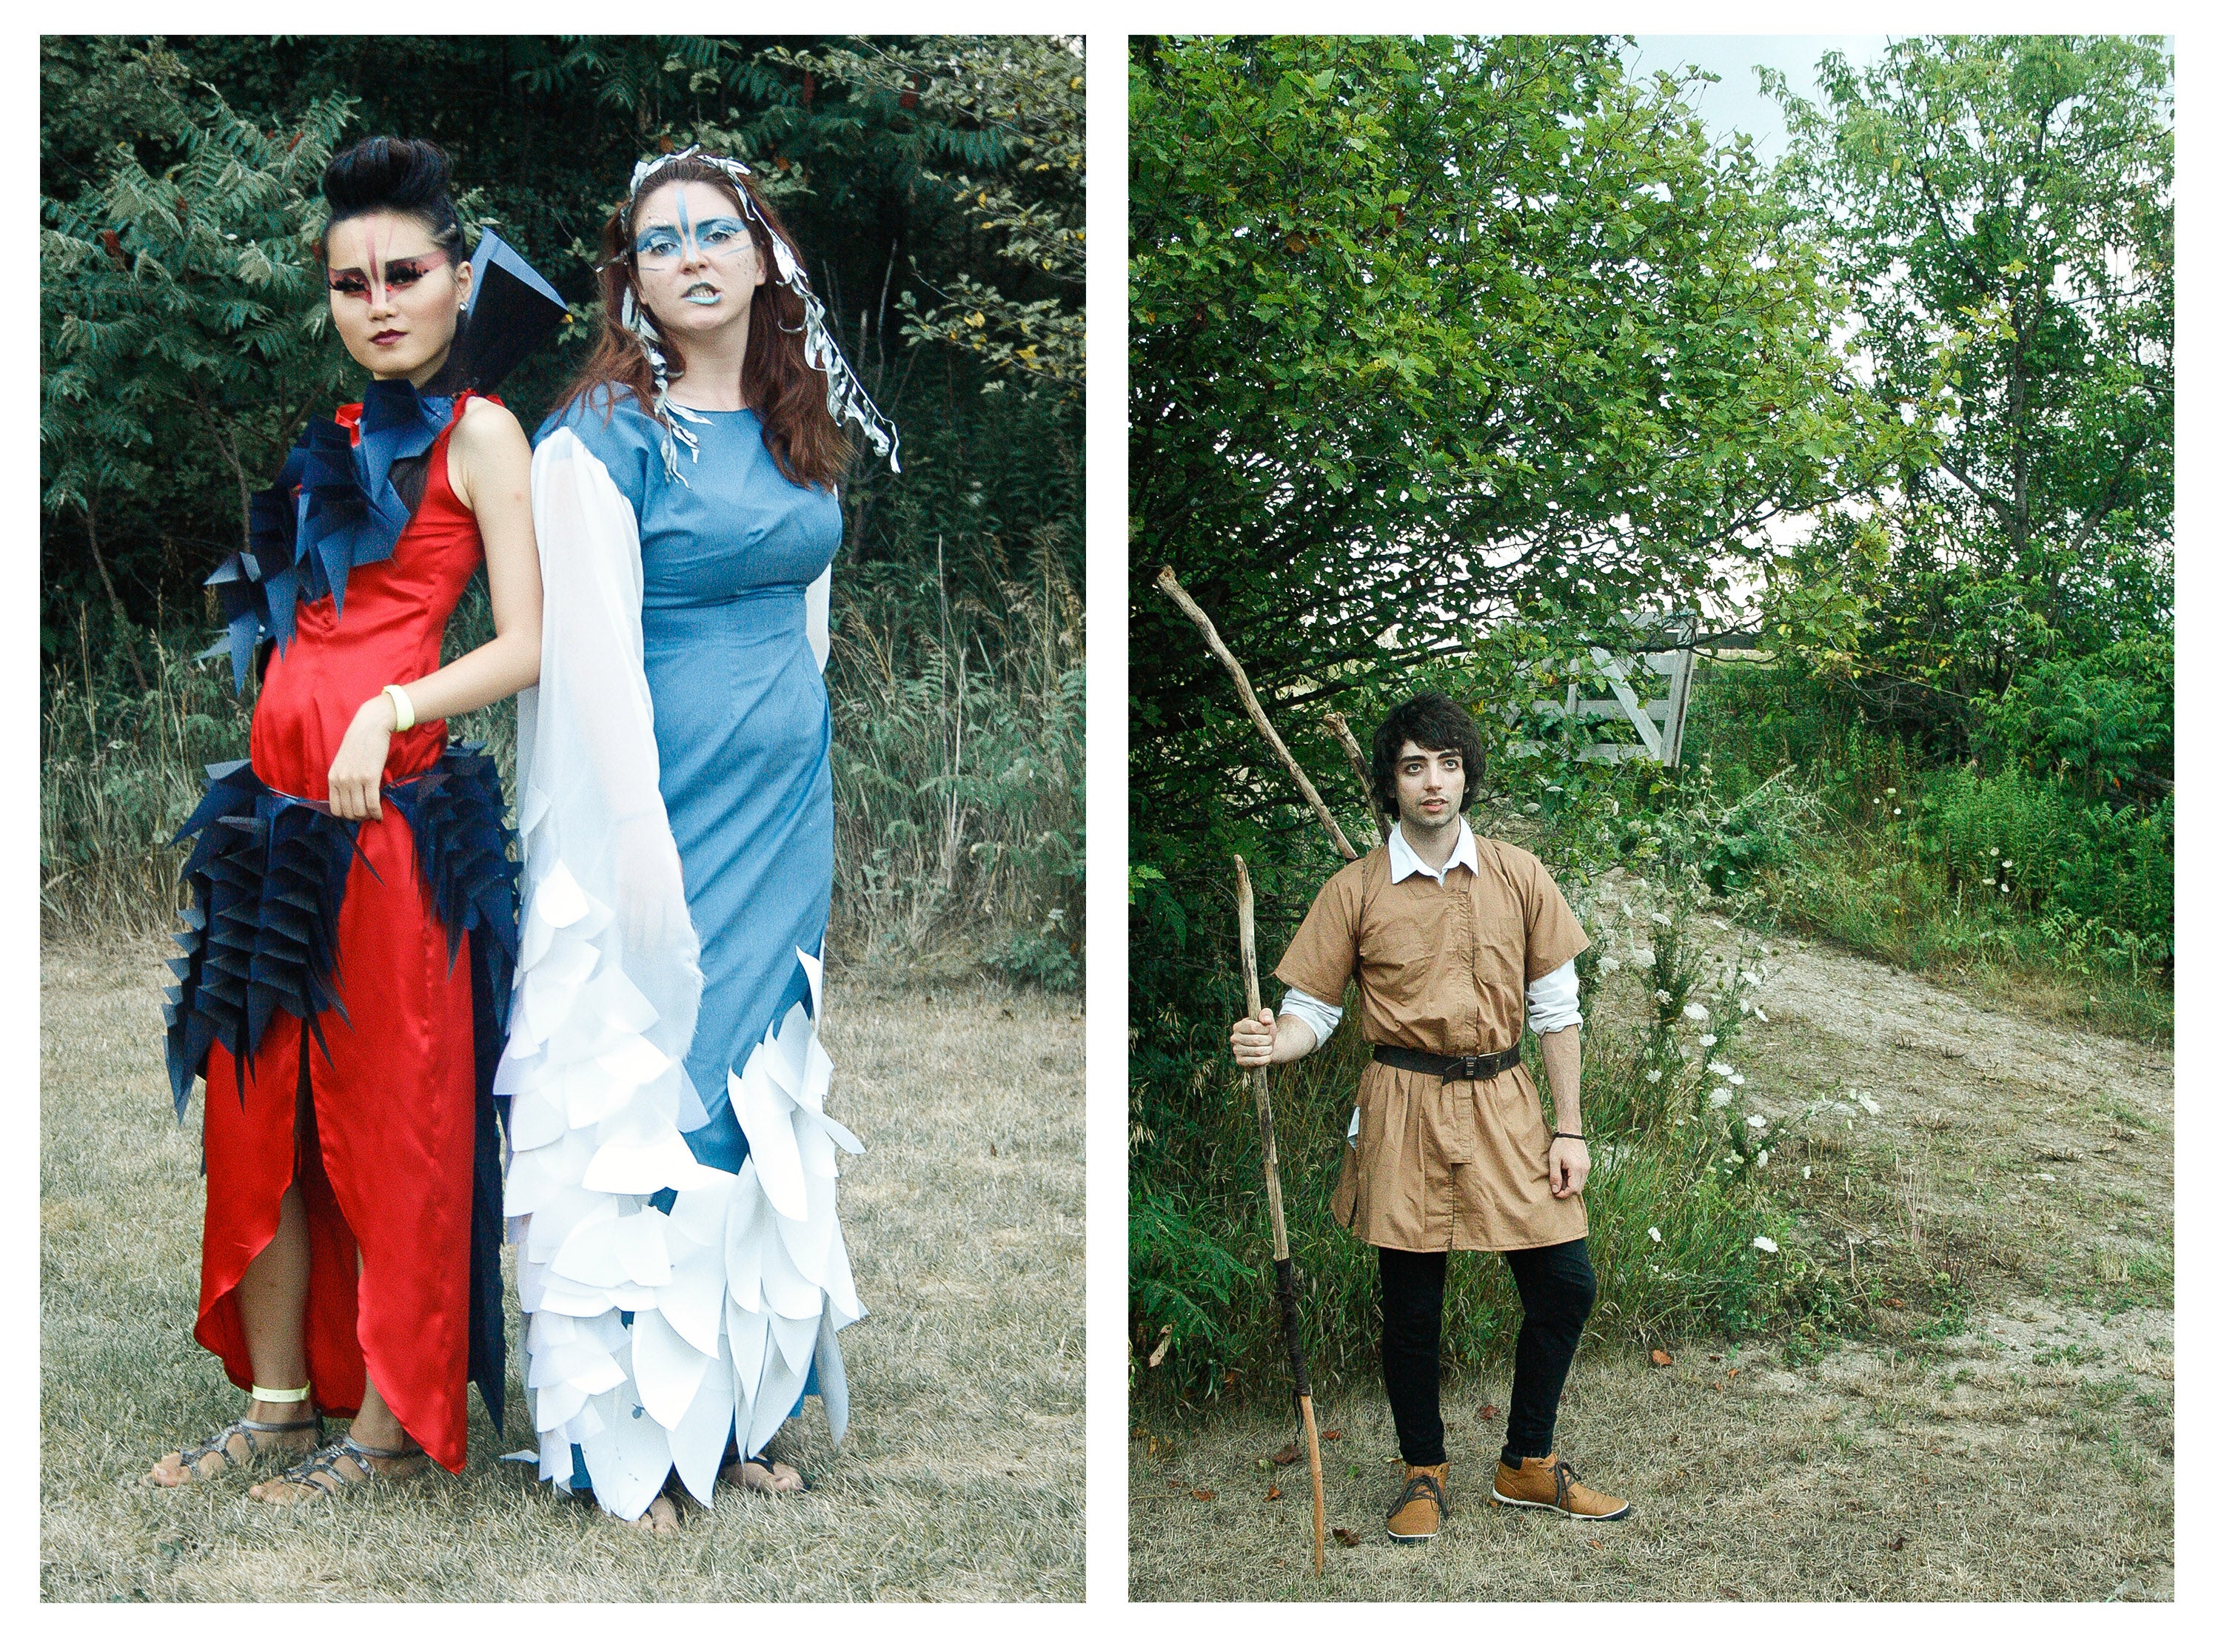 Two photographs of actors, wearing costumes posing in front of a number of trees.